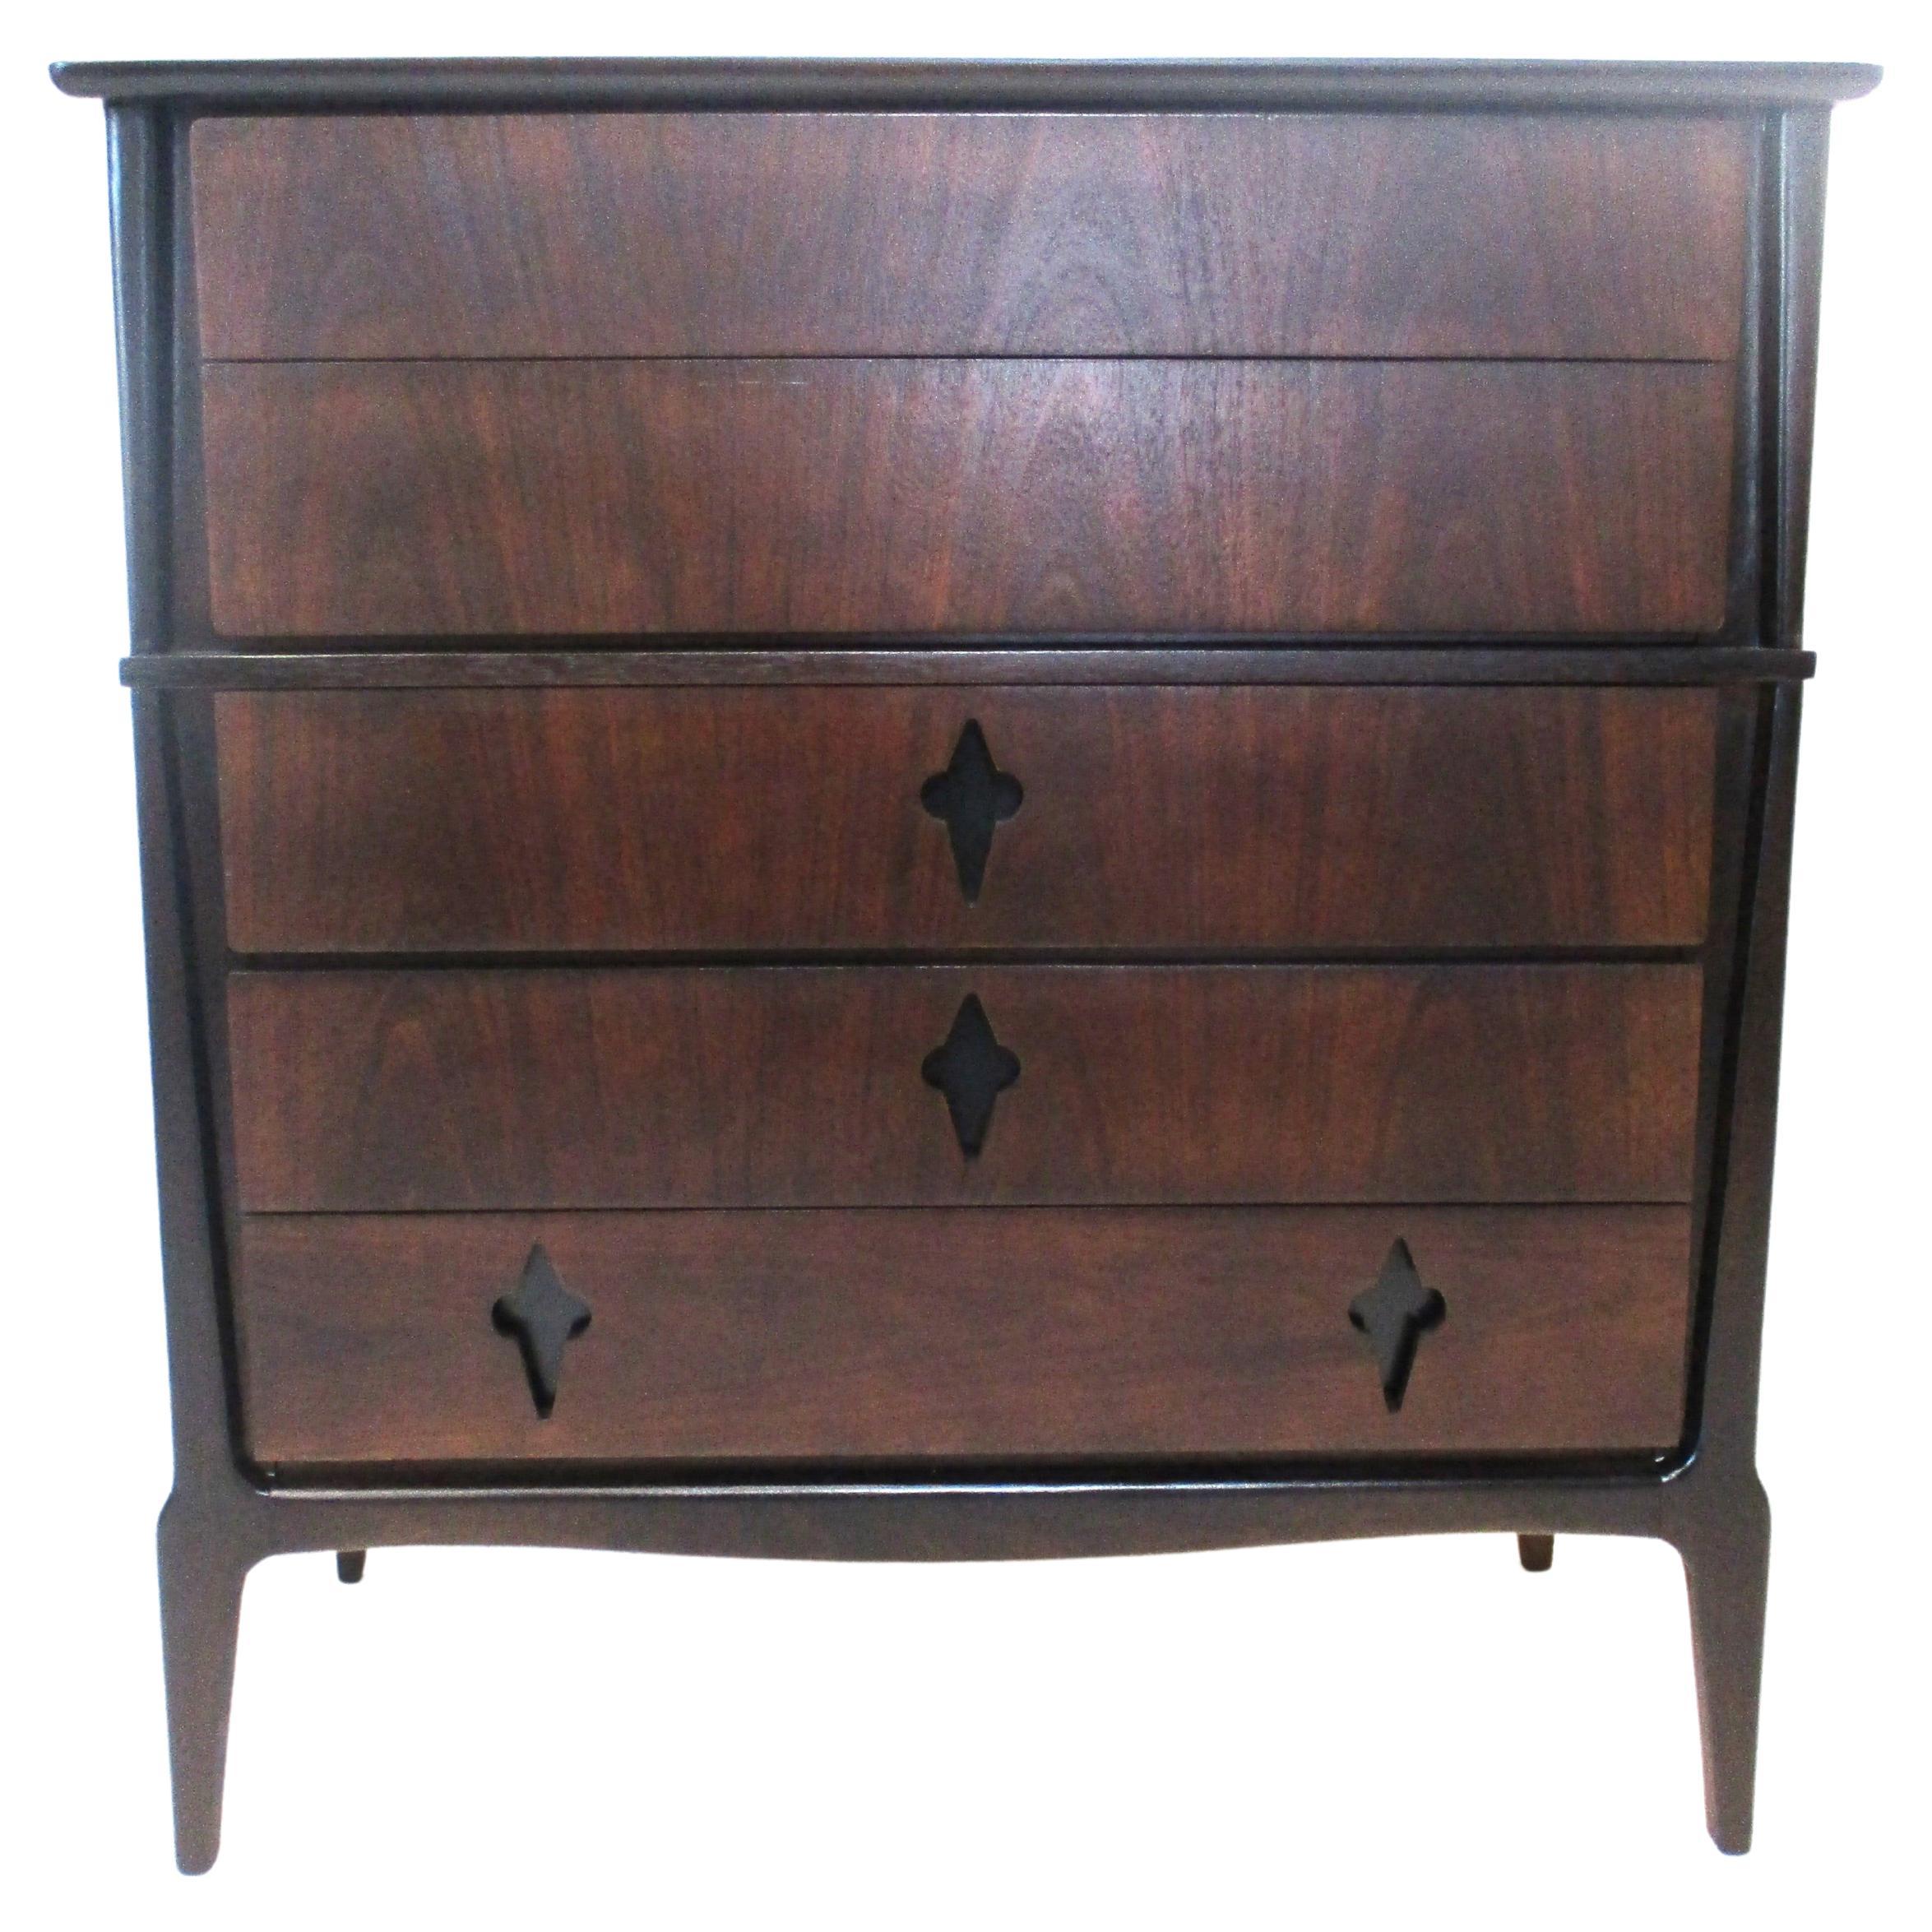 Midcentury Ebony Toned Tall Dresser Chest by United